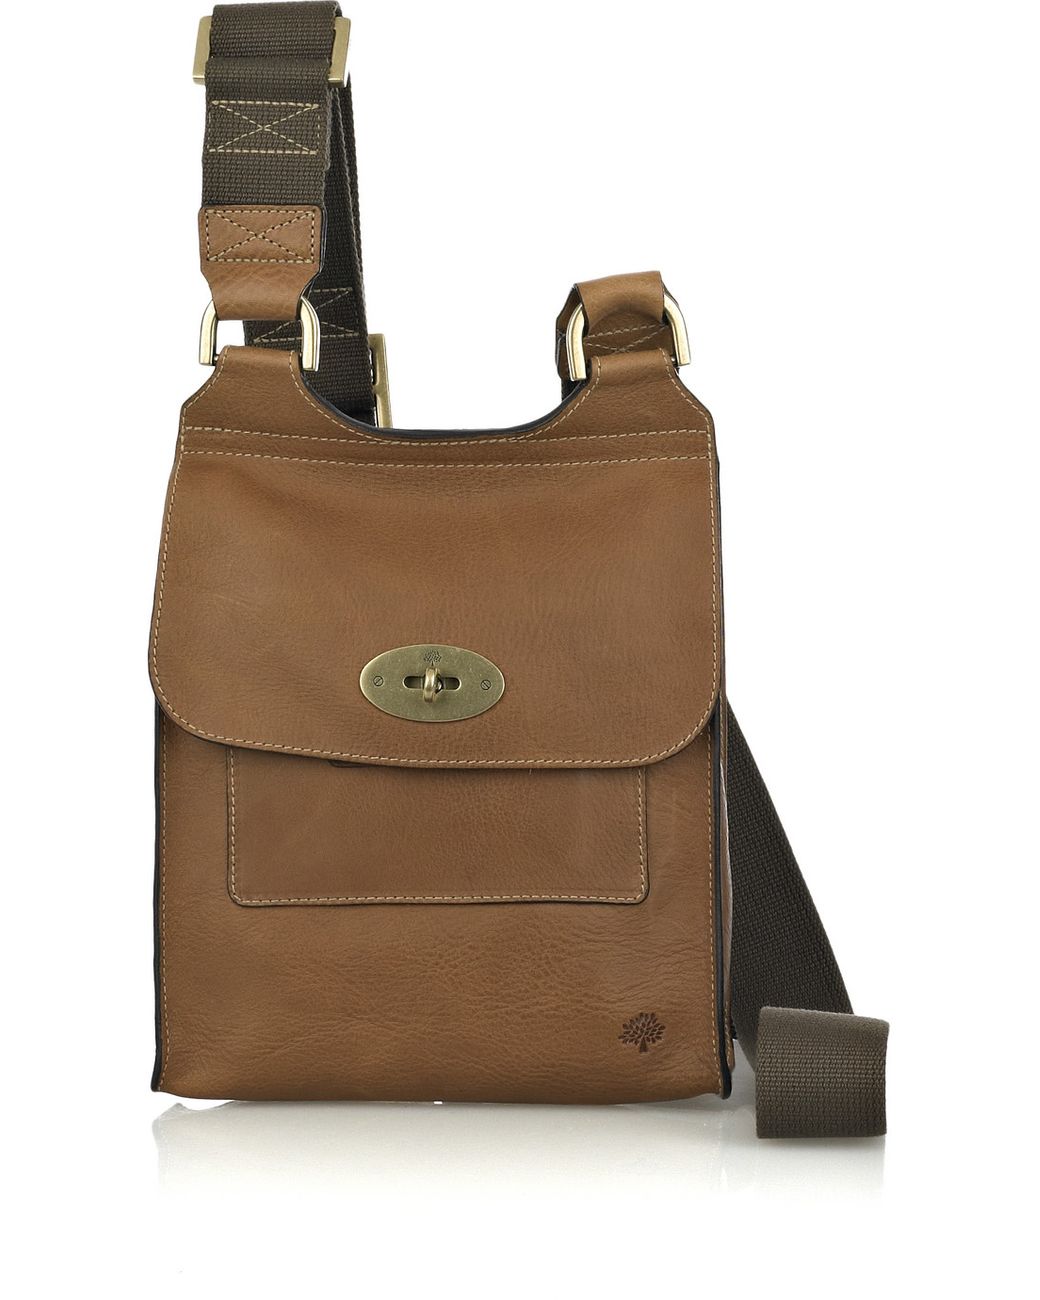 Mulberry Antony Leather Cross-body Bag in Brown | Lyst